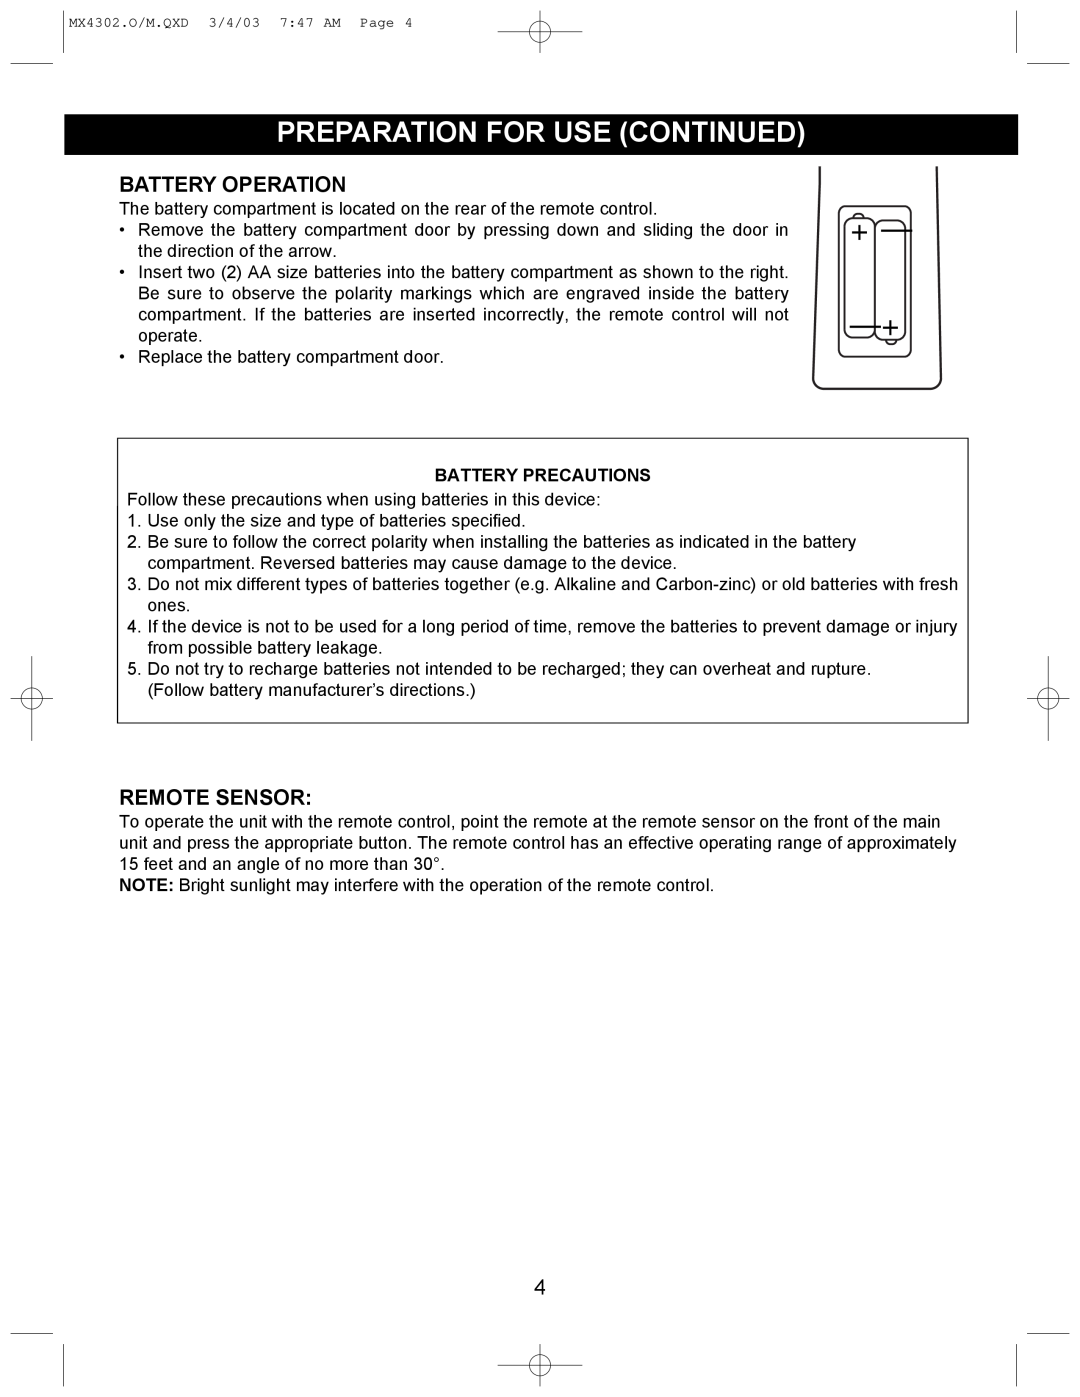 Memorex MX4302 operating instructions Preparation For Use Continued, Battery Operation, Remote Sensor, Battery Precautions 